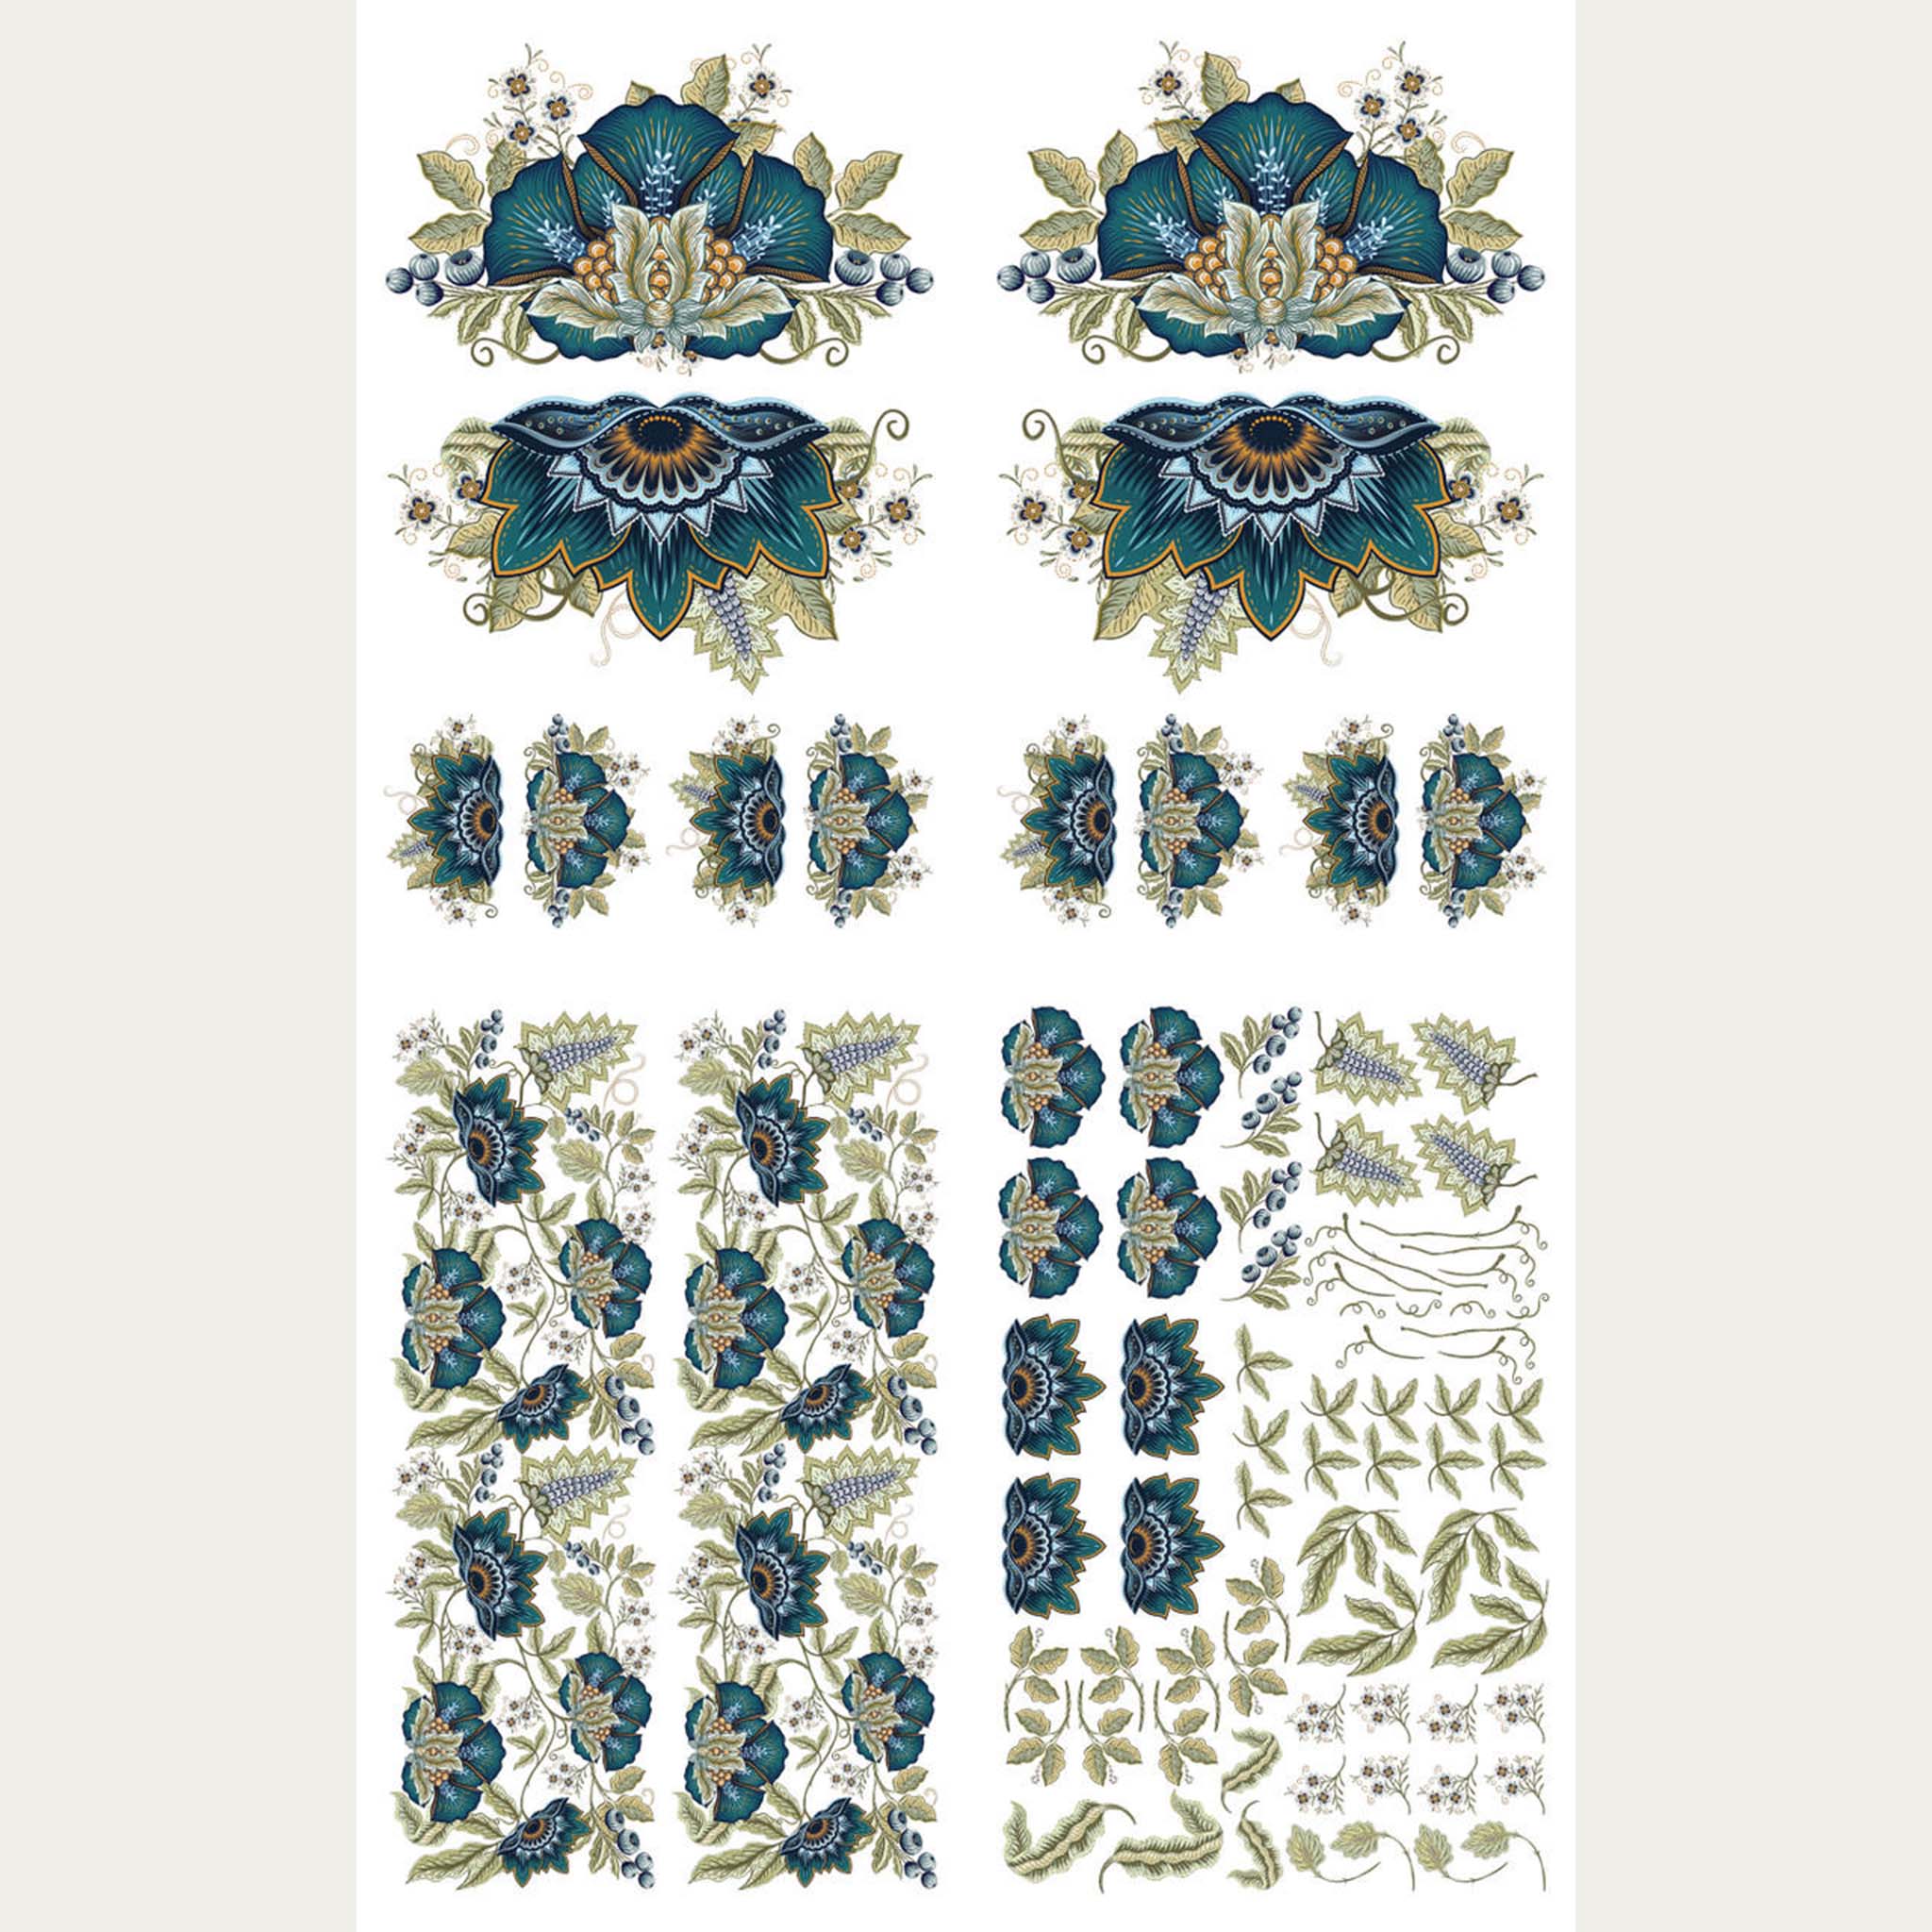 Rub-on transfer that features multiple sizes of teal lotuses with muted green vines is on a white background.